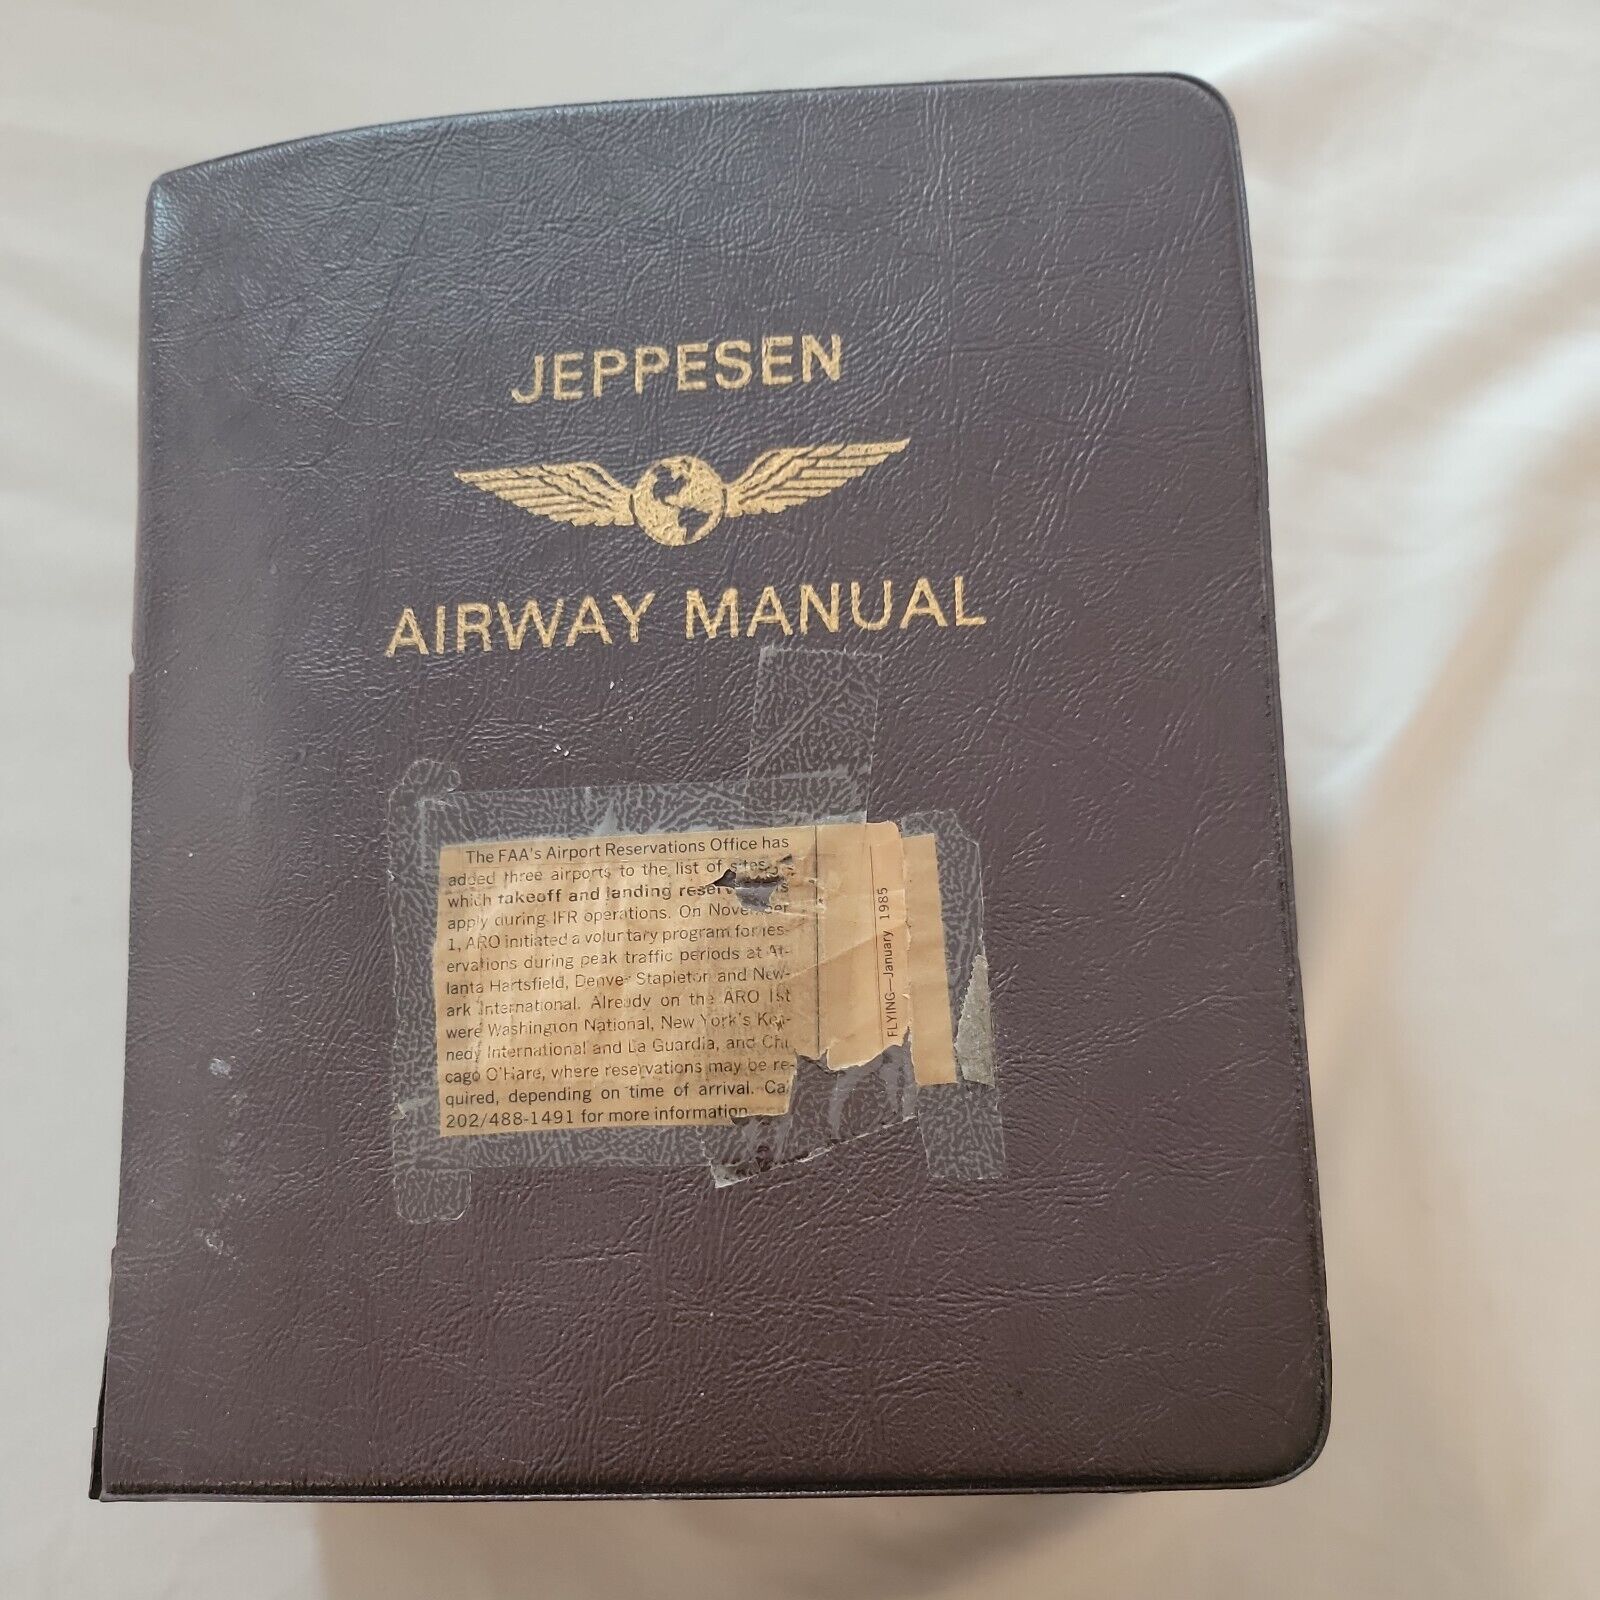 Jeppesen Airway Manual - Neppenden USA Domestic Charts and Maps Full Lo and Hi